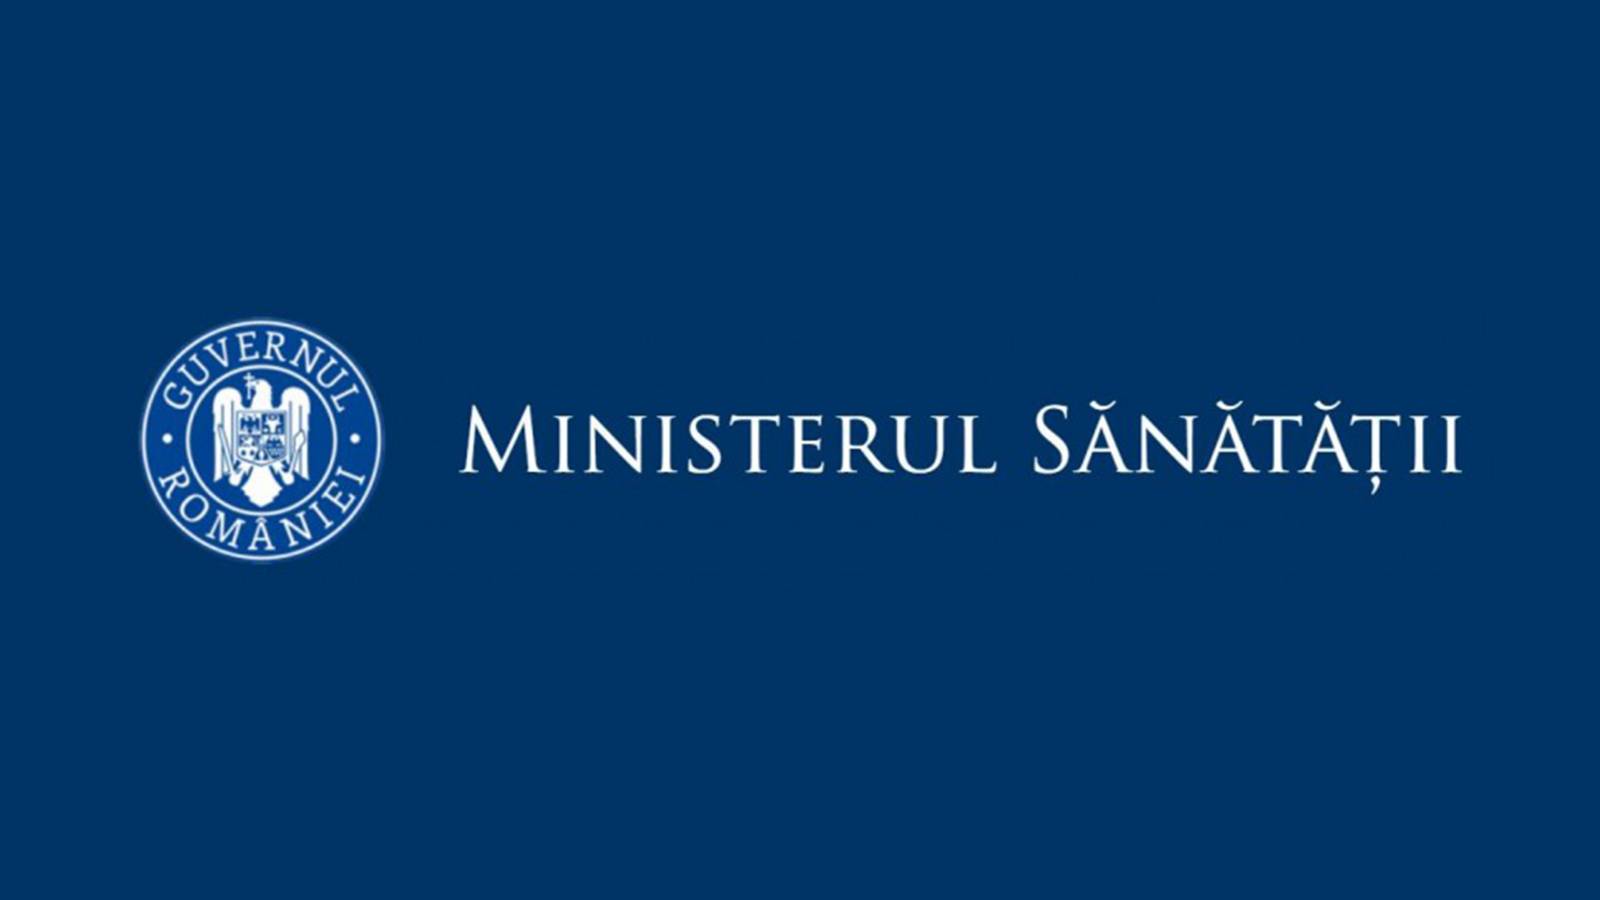 The Ministry of Health has a record in Romania